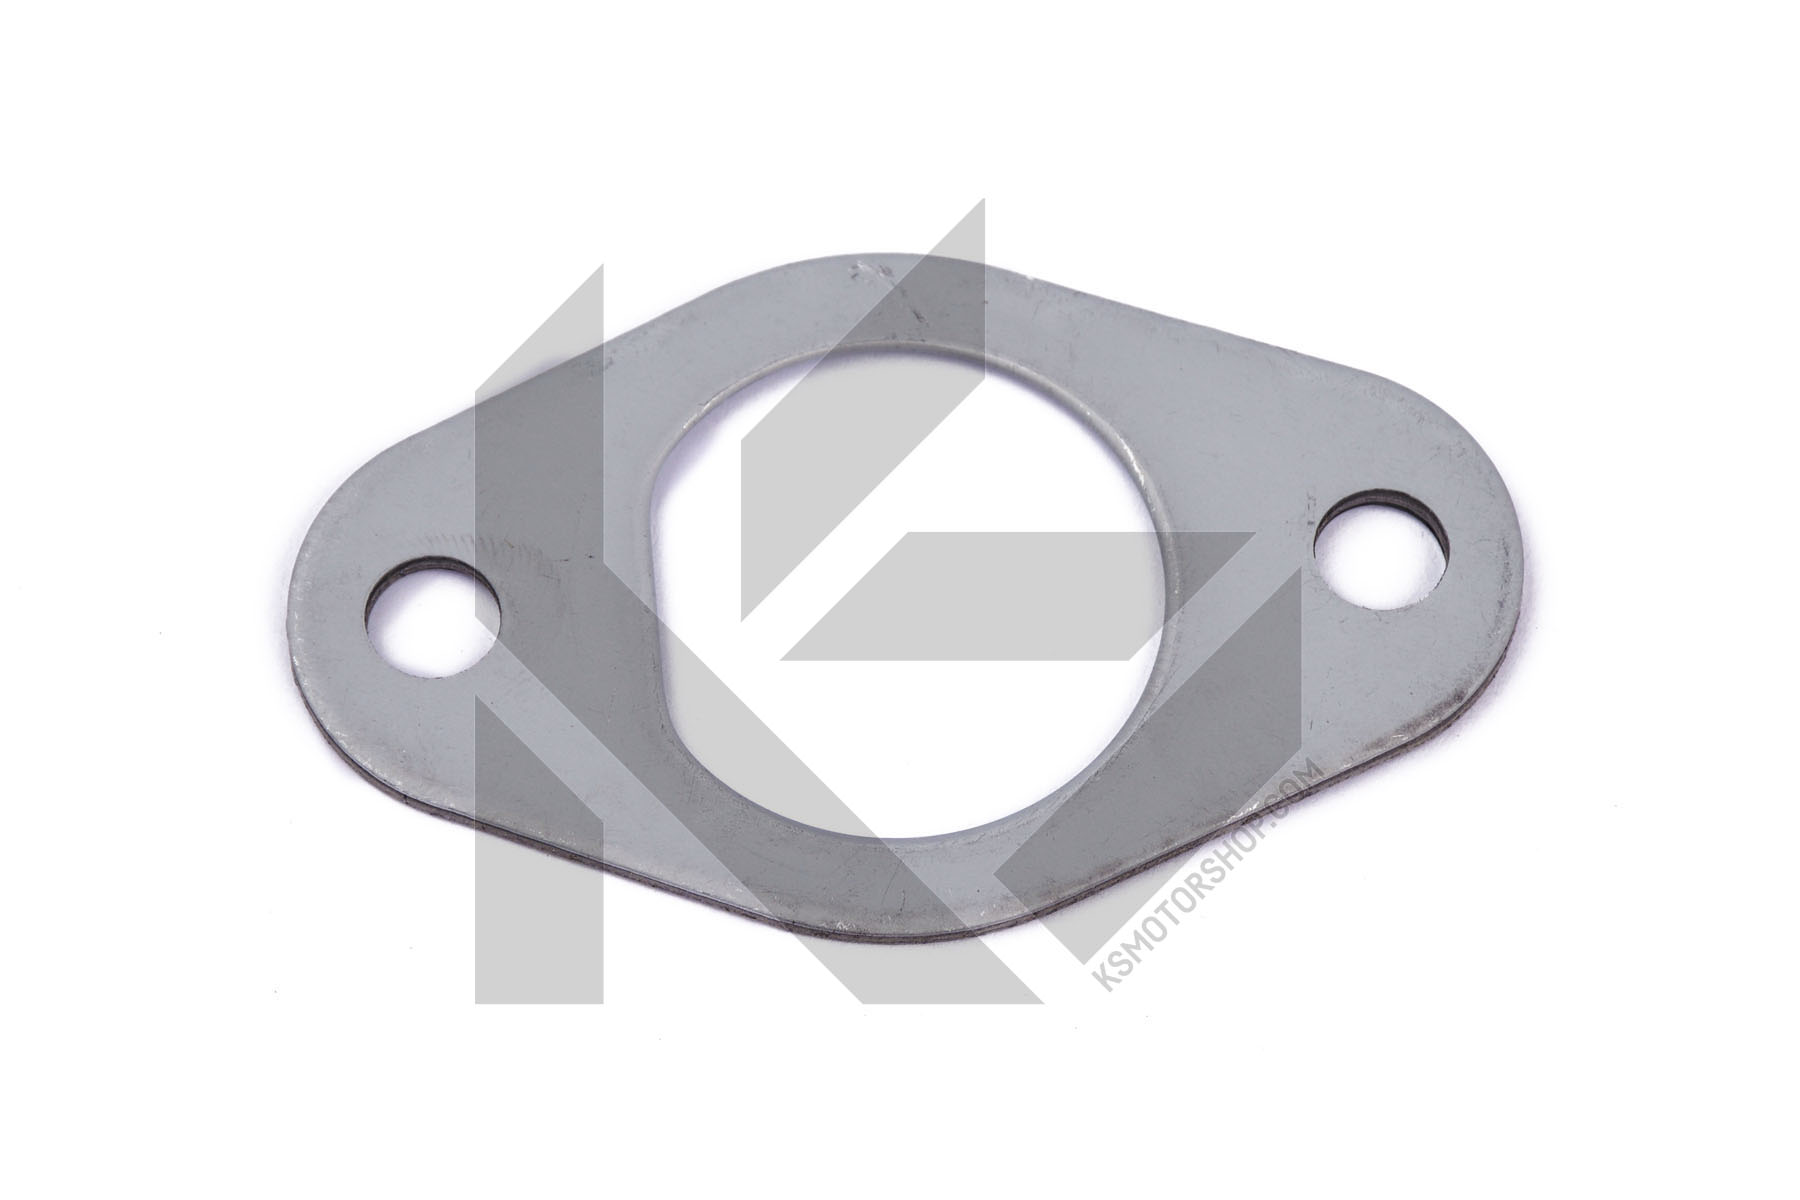 018.709, Gasket, exhaust manifold, ELRING, 048129589A, 048.129.589.A, 31-023623-10, 460392H, 51297, 601858, 70-23731-30, JB902, 70-23731-40, X51297-01, 71-23731-40